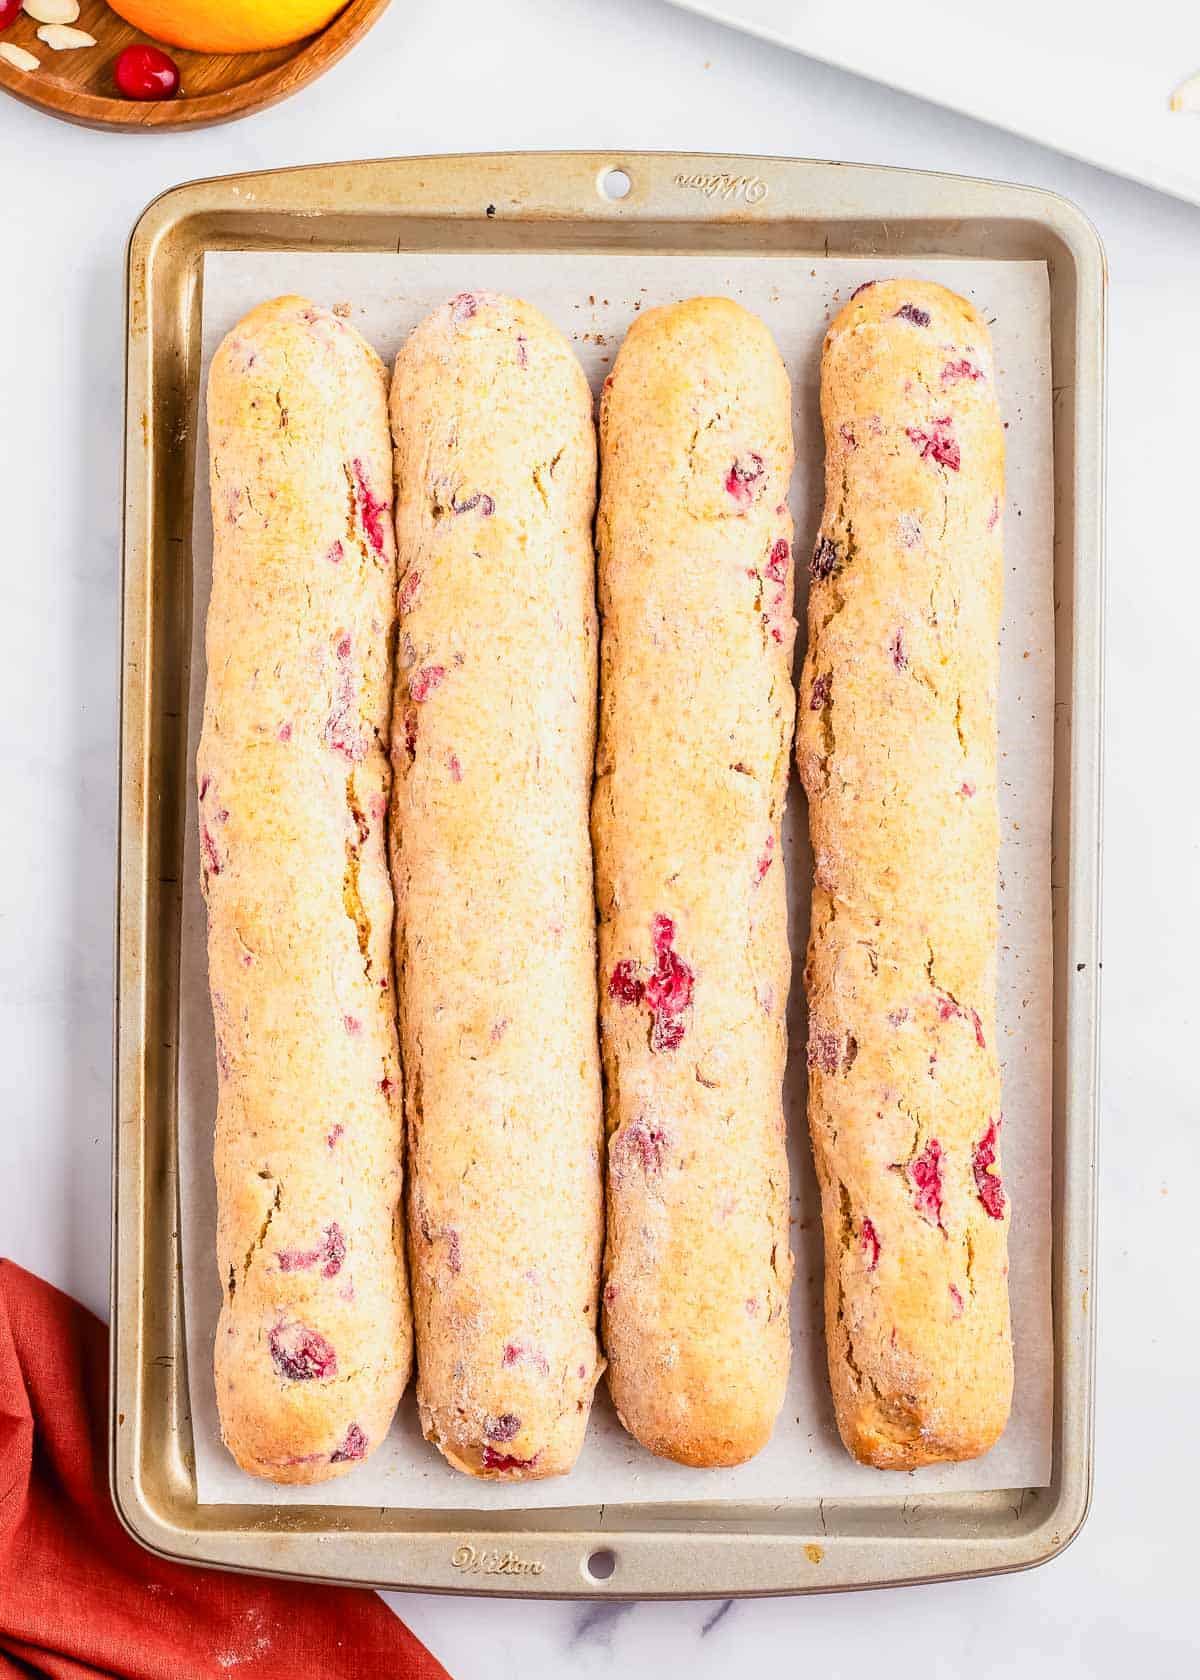 Orange cranberry biscotti after the first bake on a baking sheet.